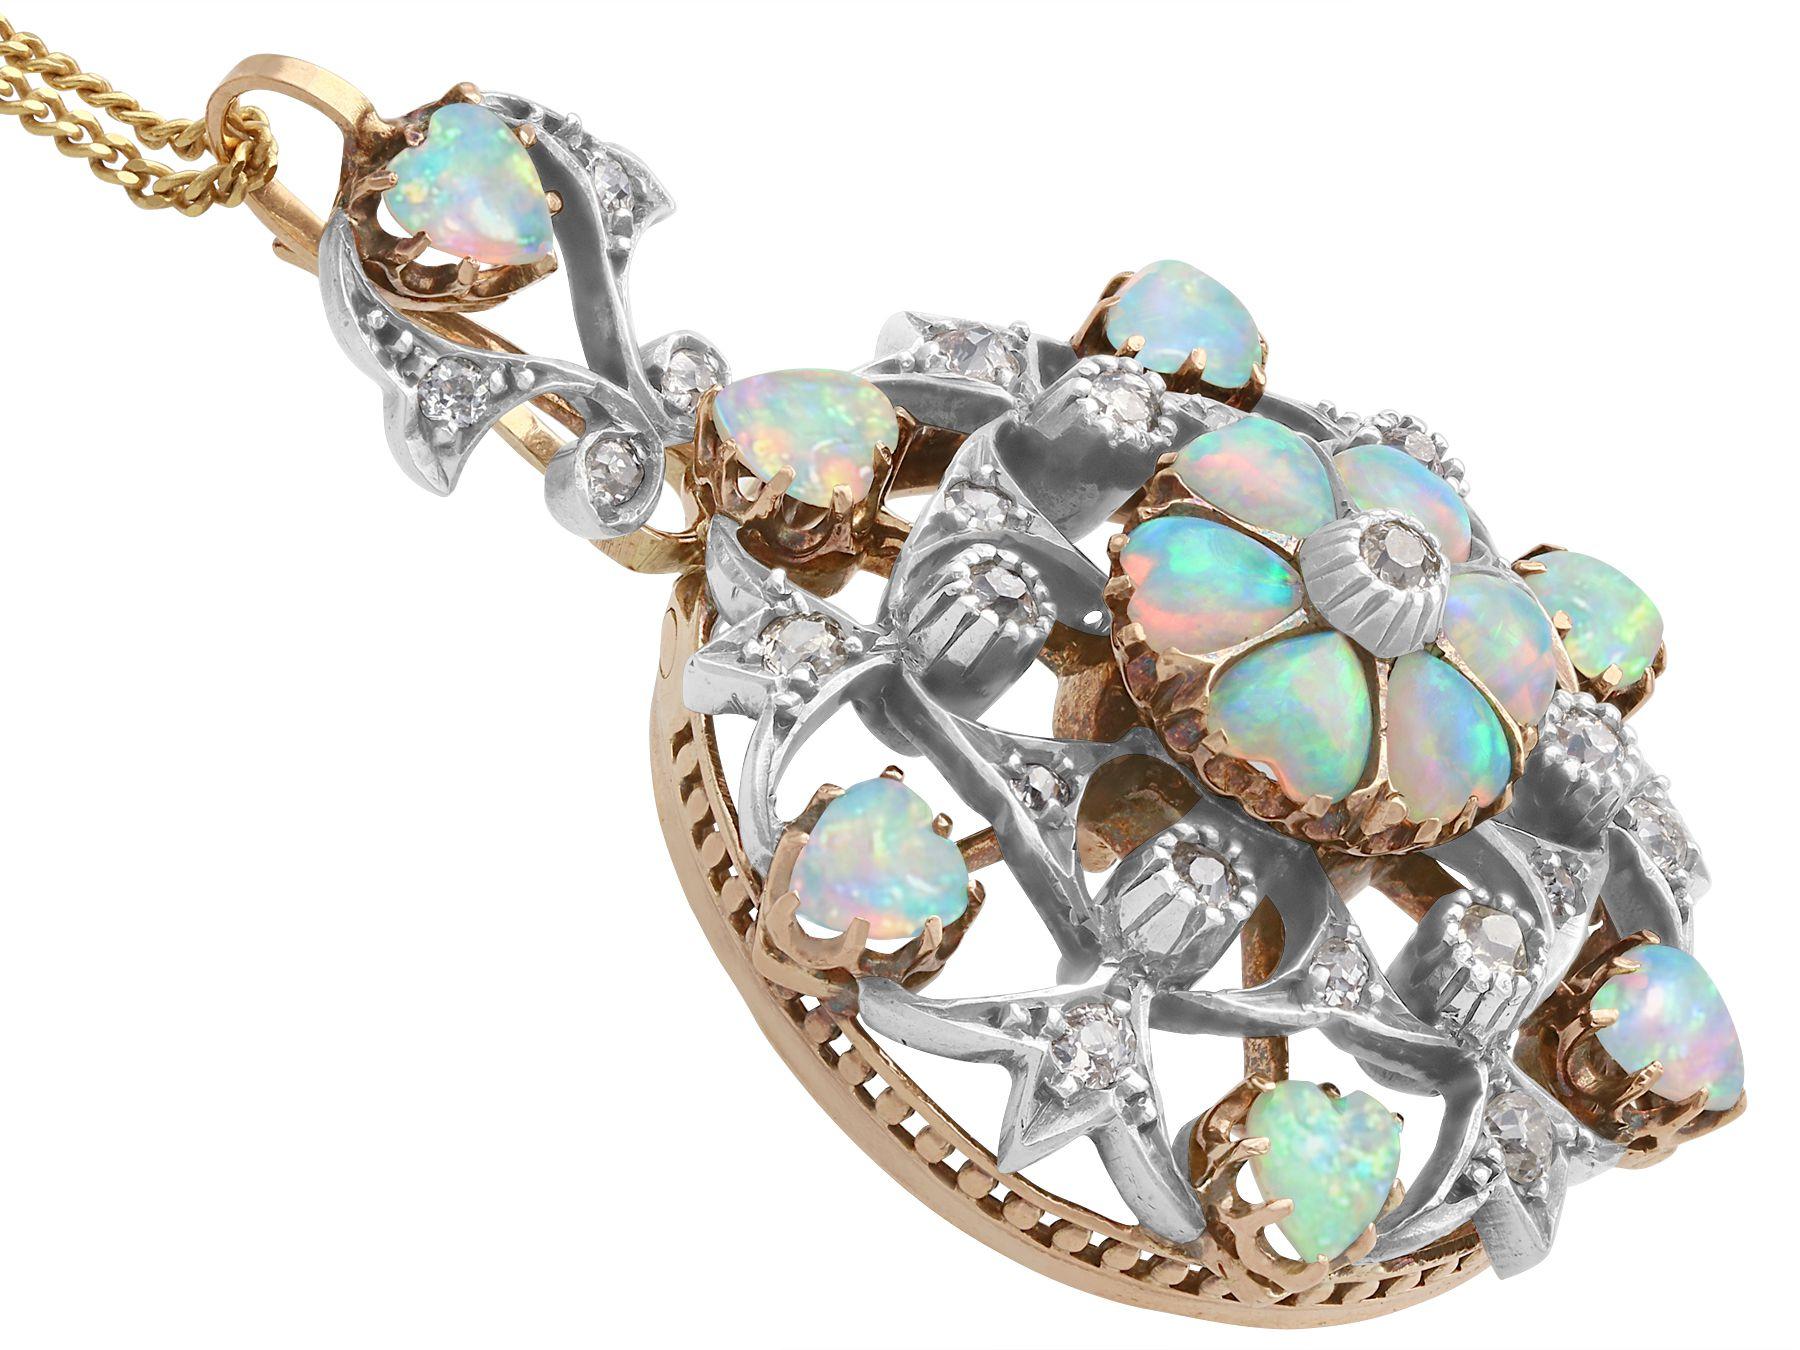 Antique 2.38 Carat Opal and Diamond Yellow Gold Pendant Brooch, 1880s In Excellent Condition For Sale In Jesmond, Newcastle Upon Tyne